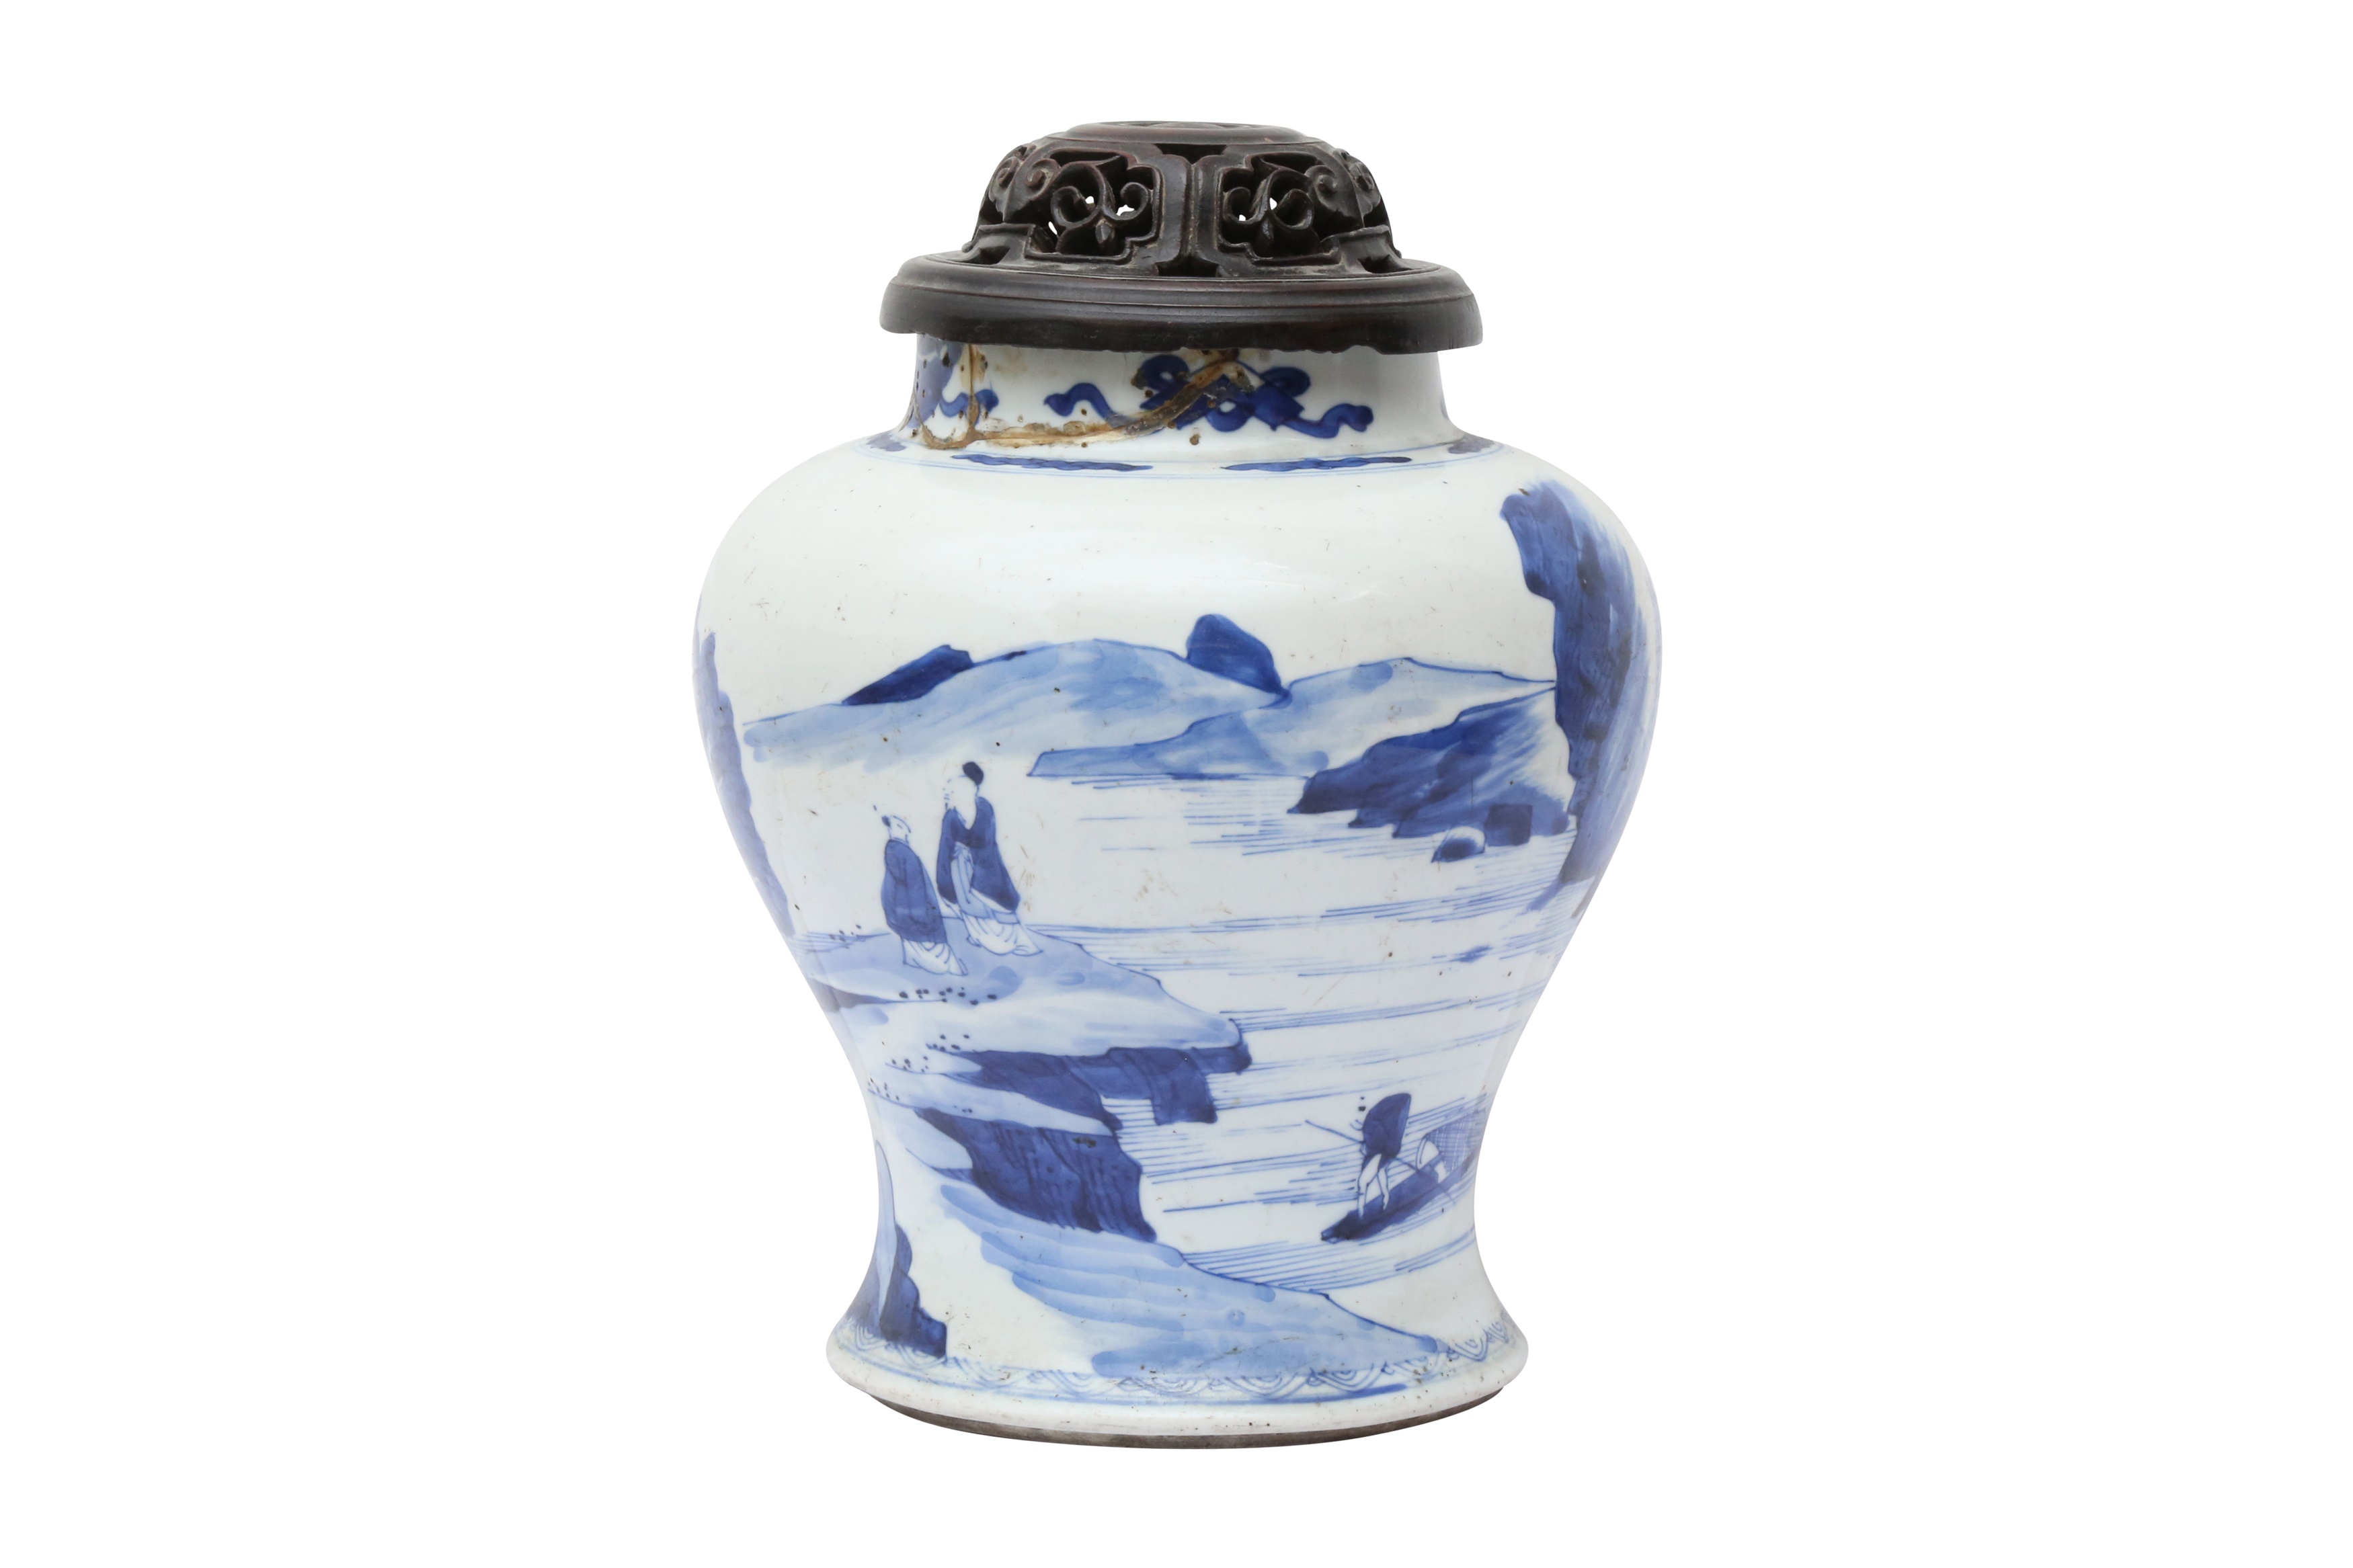 A CHINESE BLUE AND WHITE 'LANDSCAPE' VASE 清康熙 青花山水圖紋瓶 - Image 3 of 22